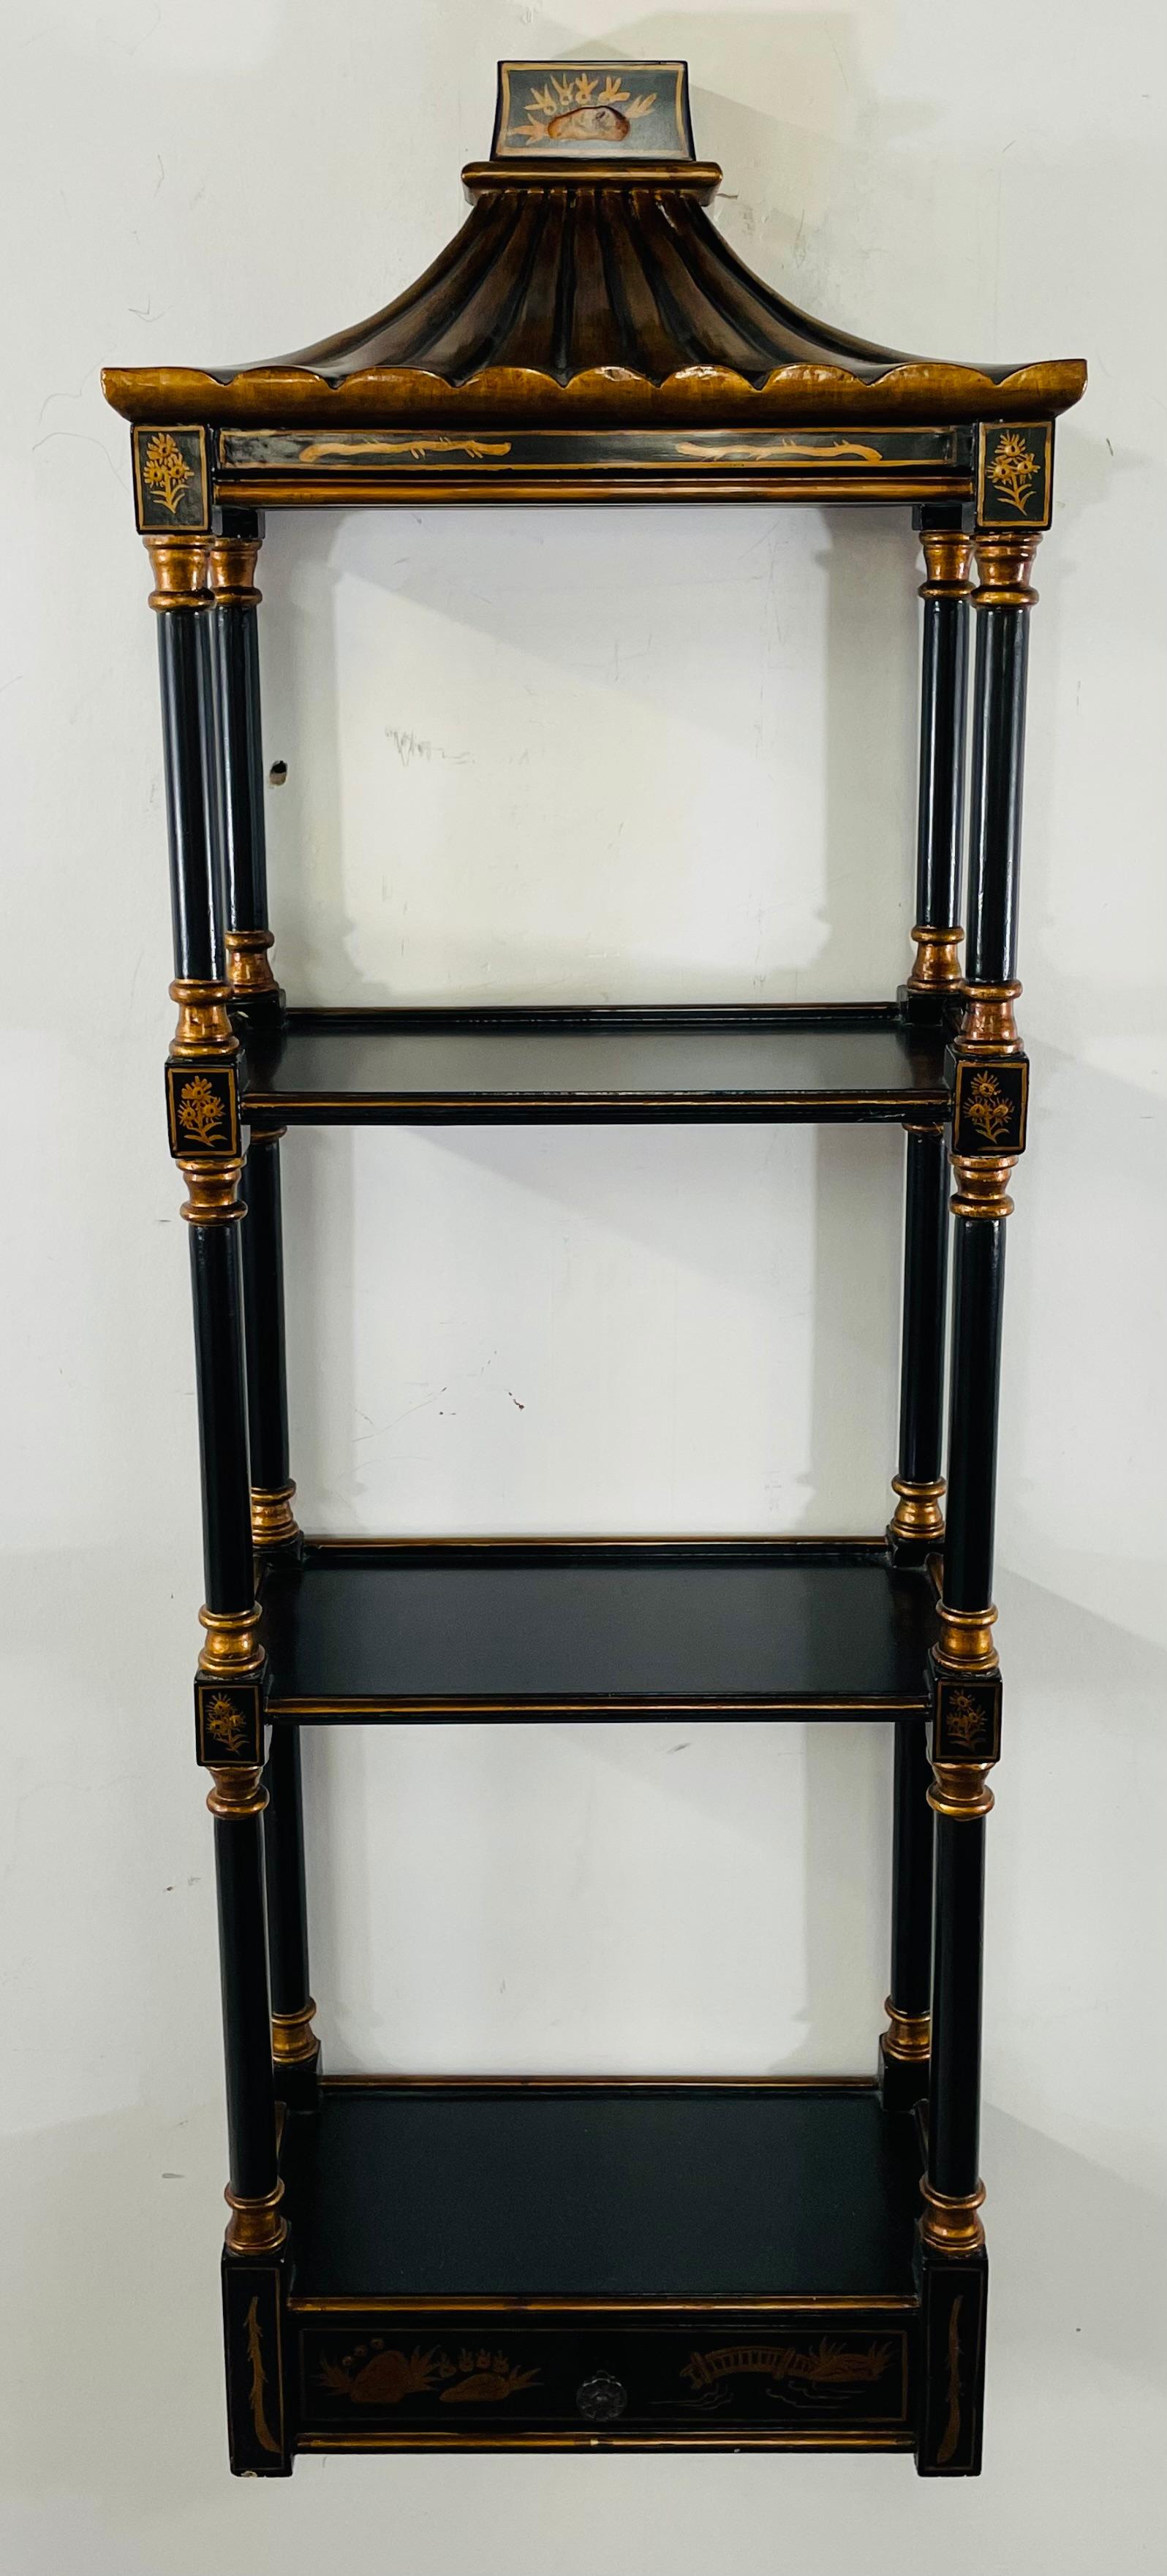 A late 20th century Chinoiserie style lacquered black wood with gilt highlight wall rack . The wall rack has three shelves and features a Pagoda form and a faux-bamboo design with a lower drawer. 

Dimensions: 12.75